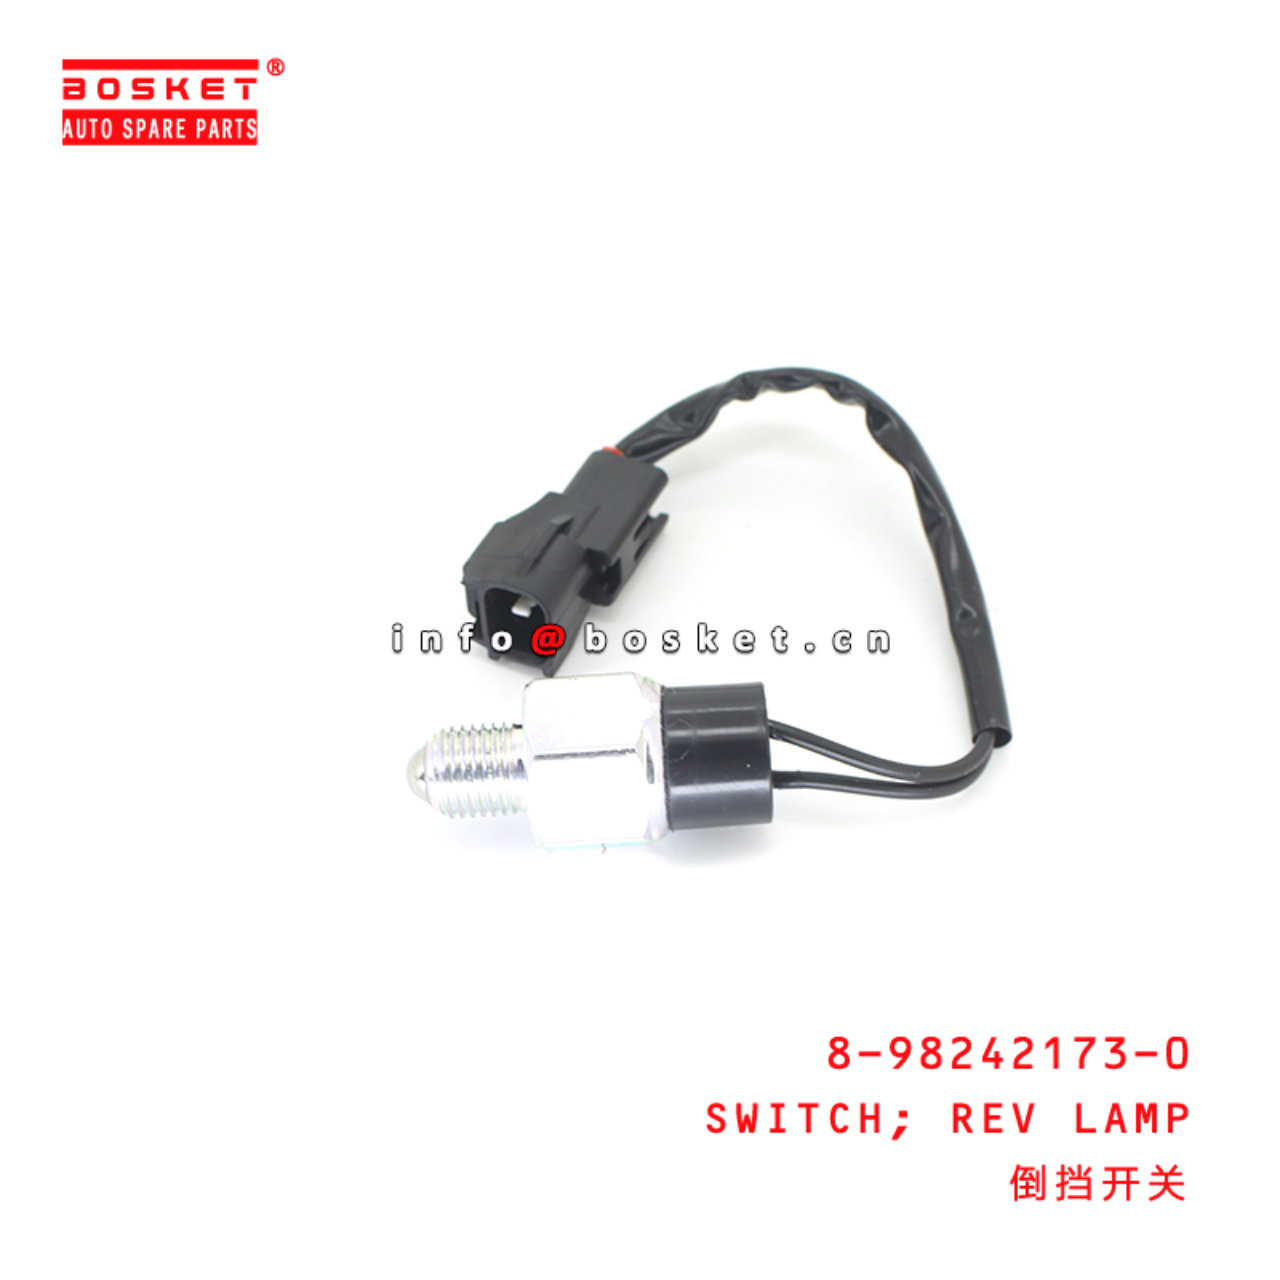 8-98242173-0 Reverse Lamp Switch suitable for ISUZU 8982421730